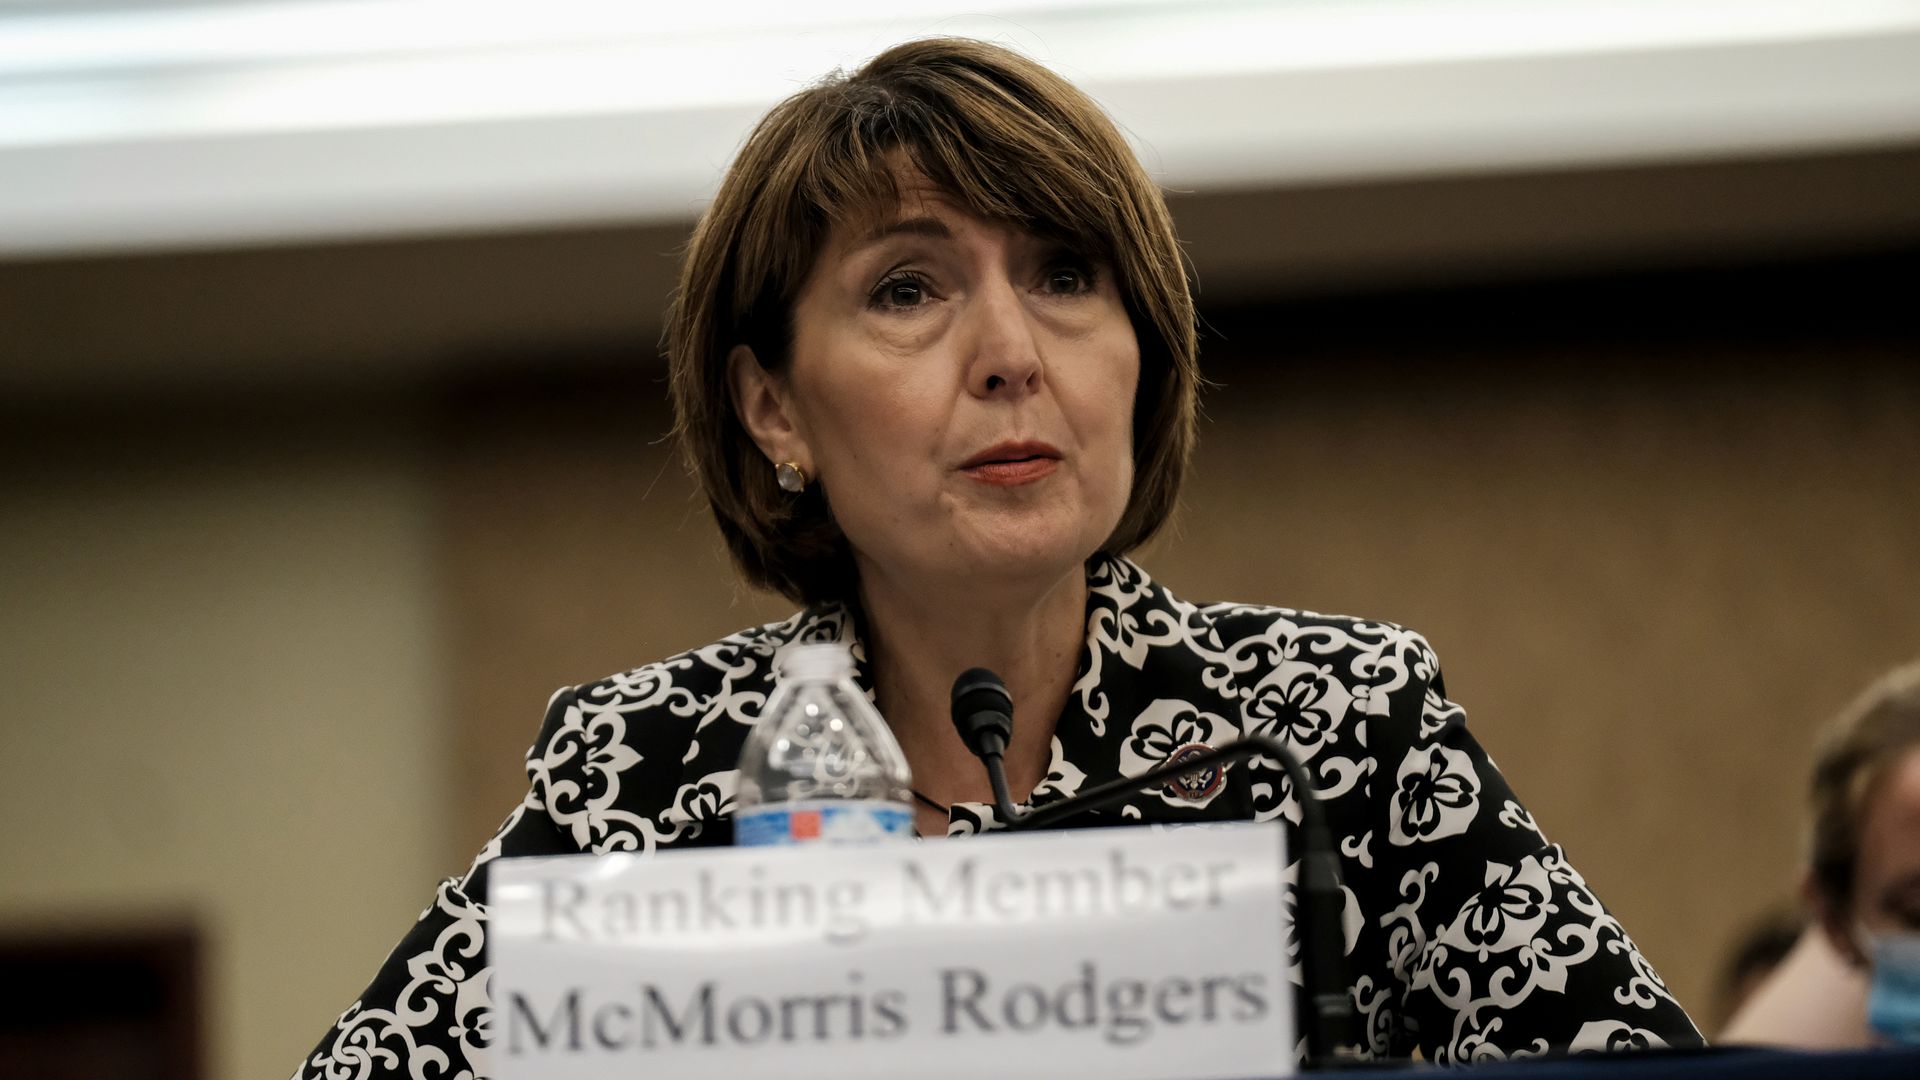 Representative Cathy McMorris Rodgers, a Republican from Washington, speaks during a Republican led House Select Subcommittee on the Coronavirus Crisis forum